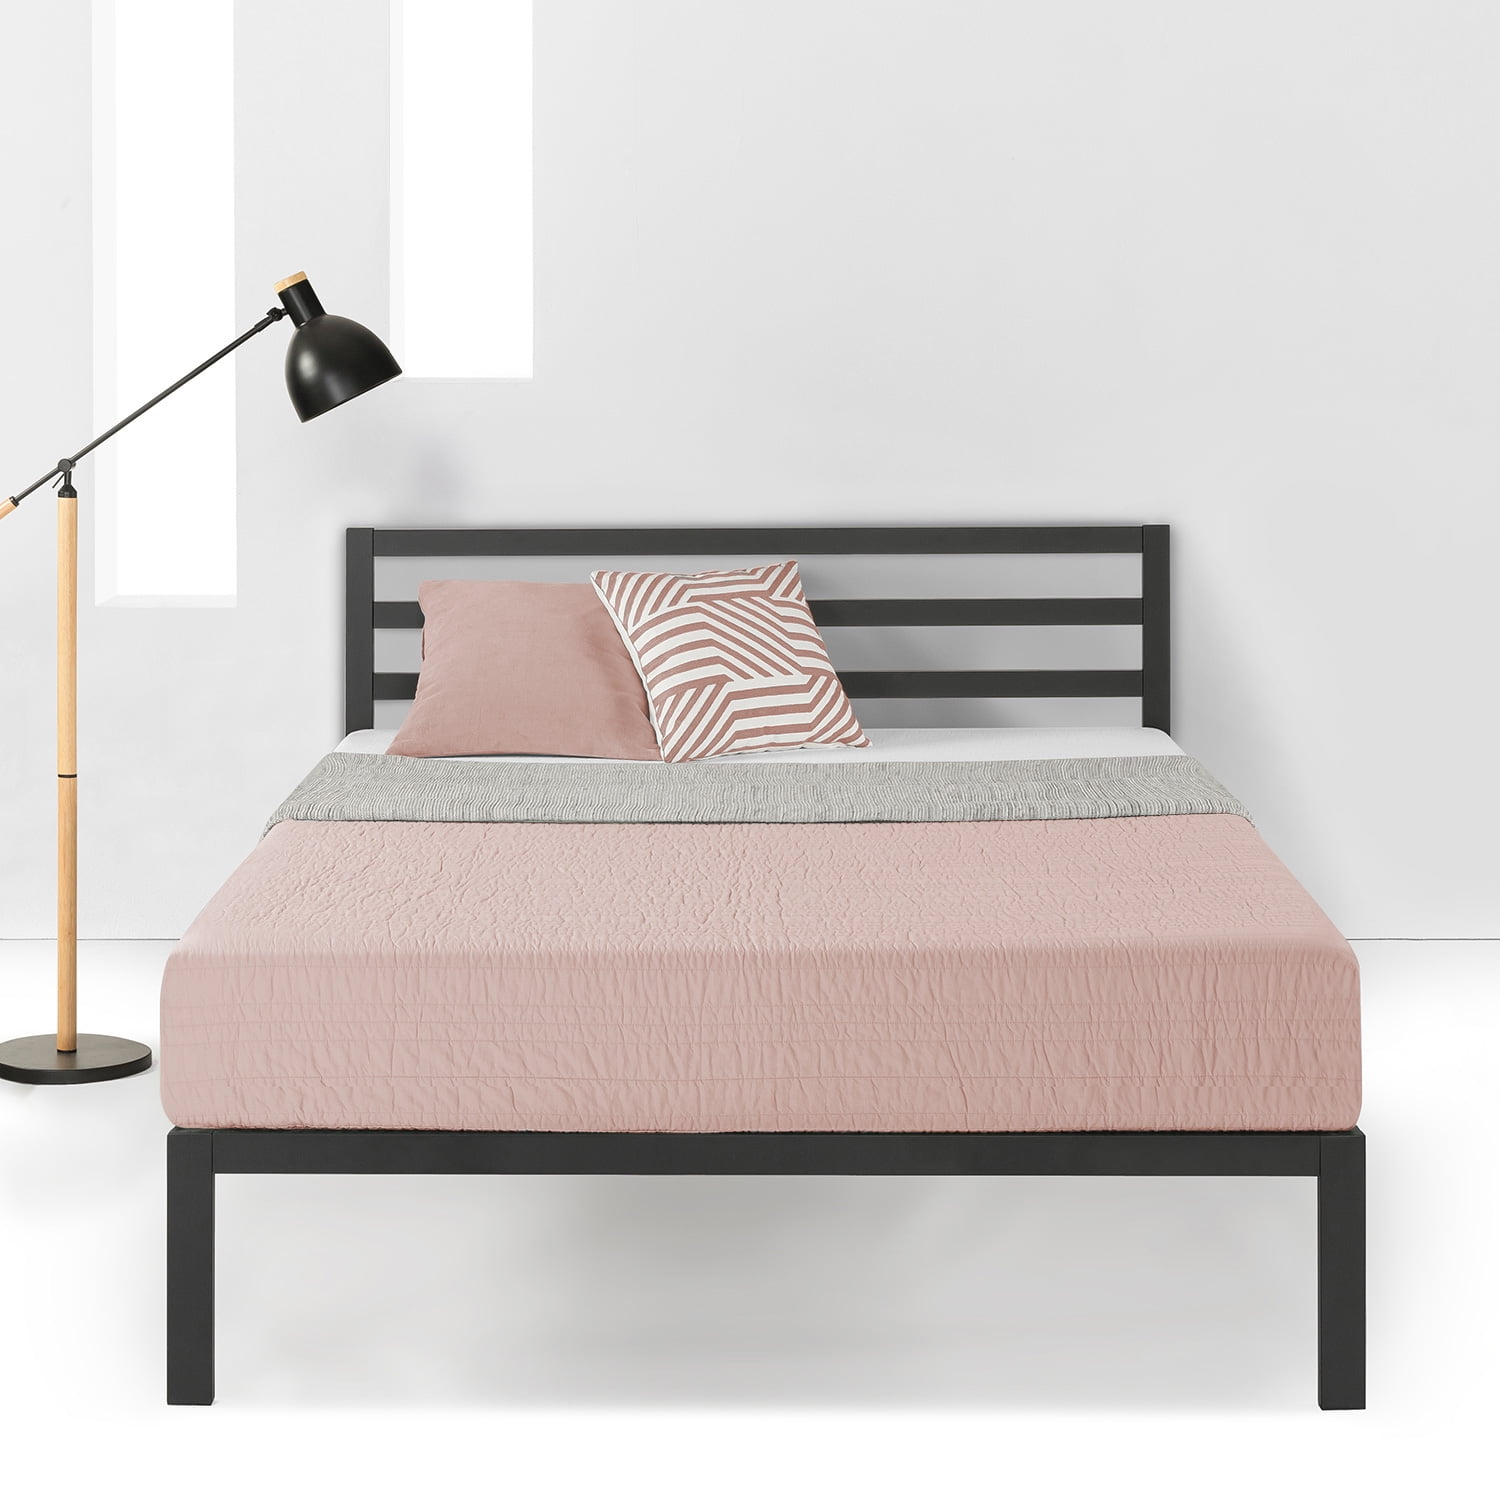 Metal Platform Bed With Headboard, Bed Frame Cost